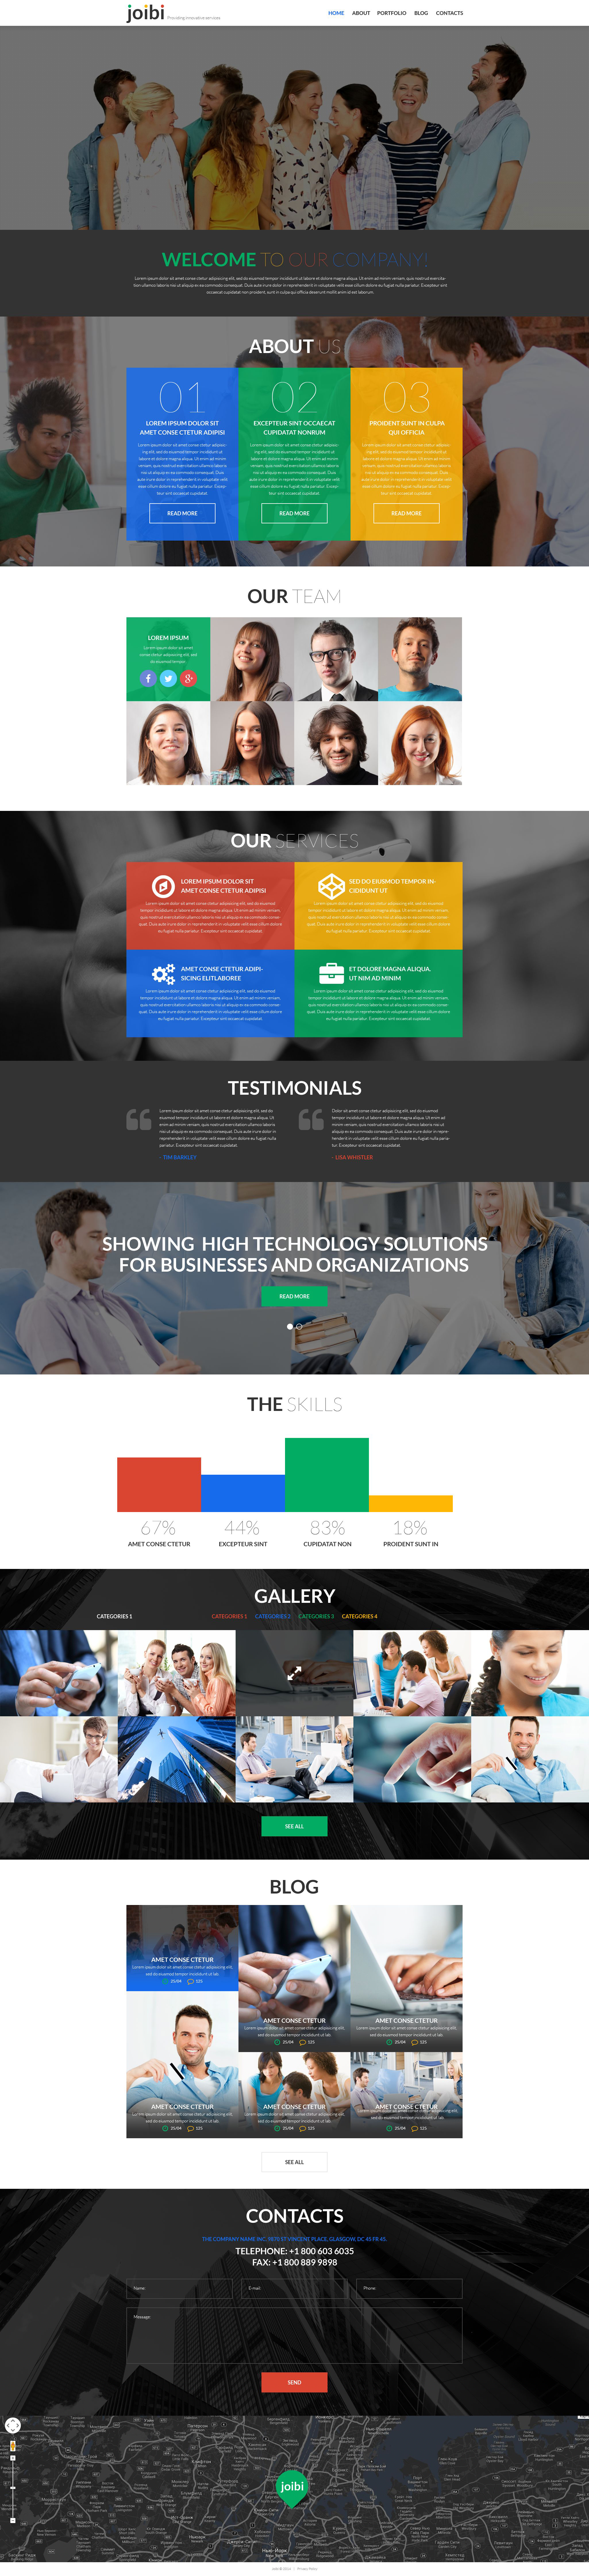 Business Services Promotion WordPress Theme